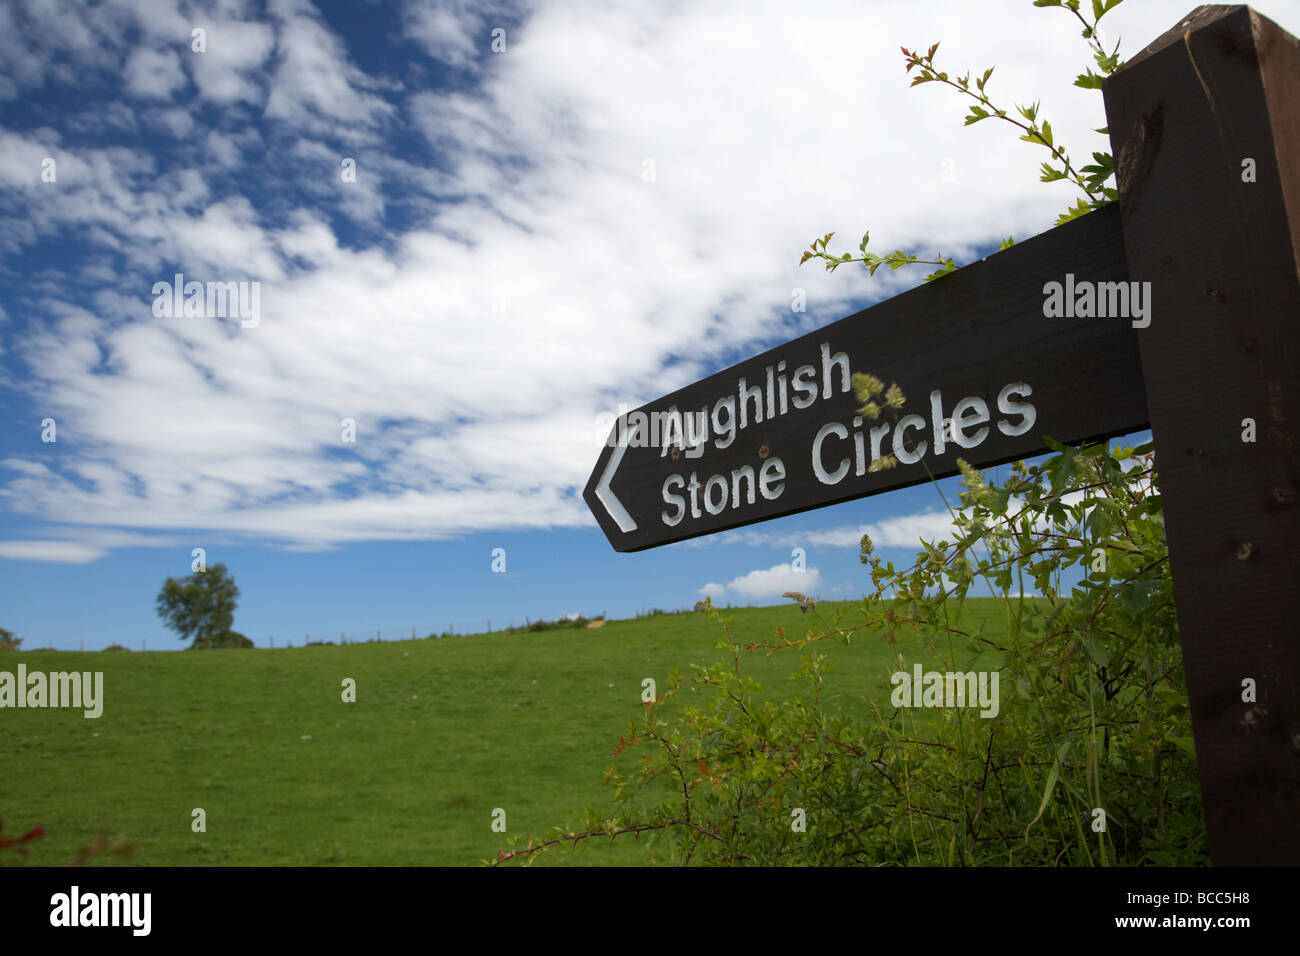 signpost for Aughlish stone circles county derry londonderry northern ireland uk Stock Photo